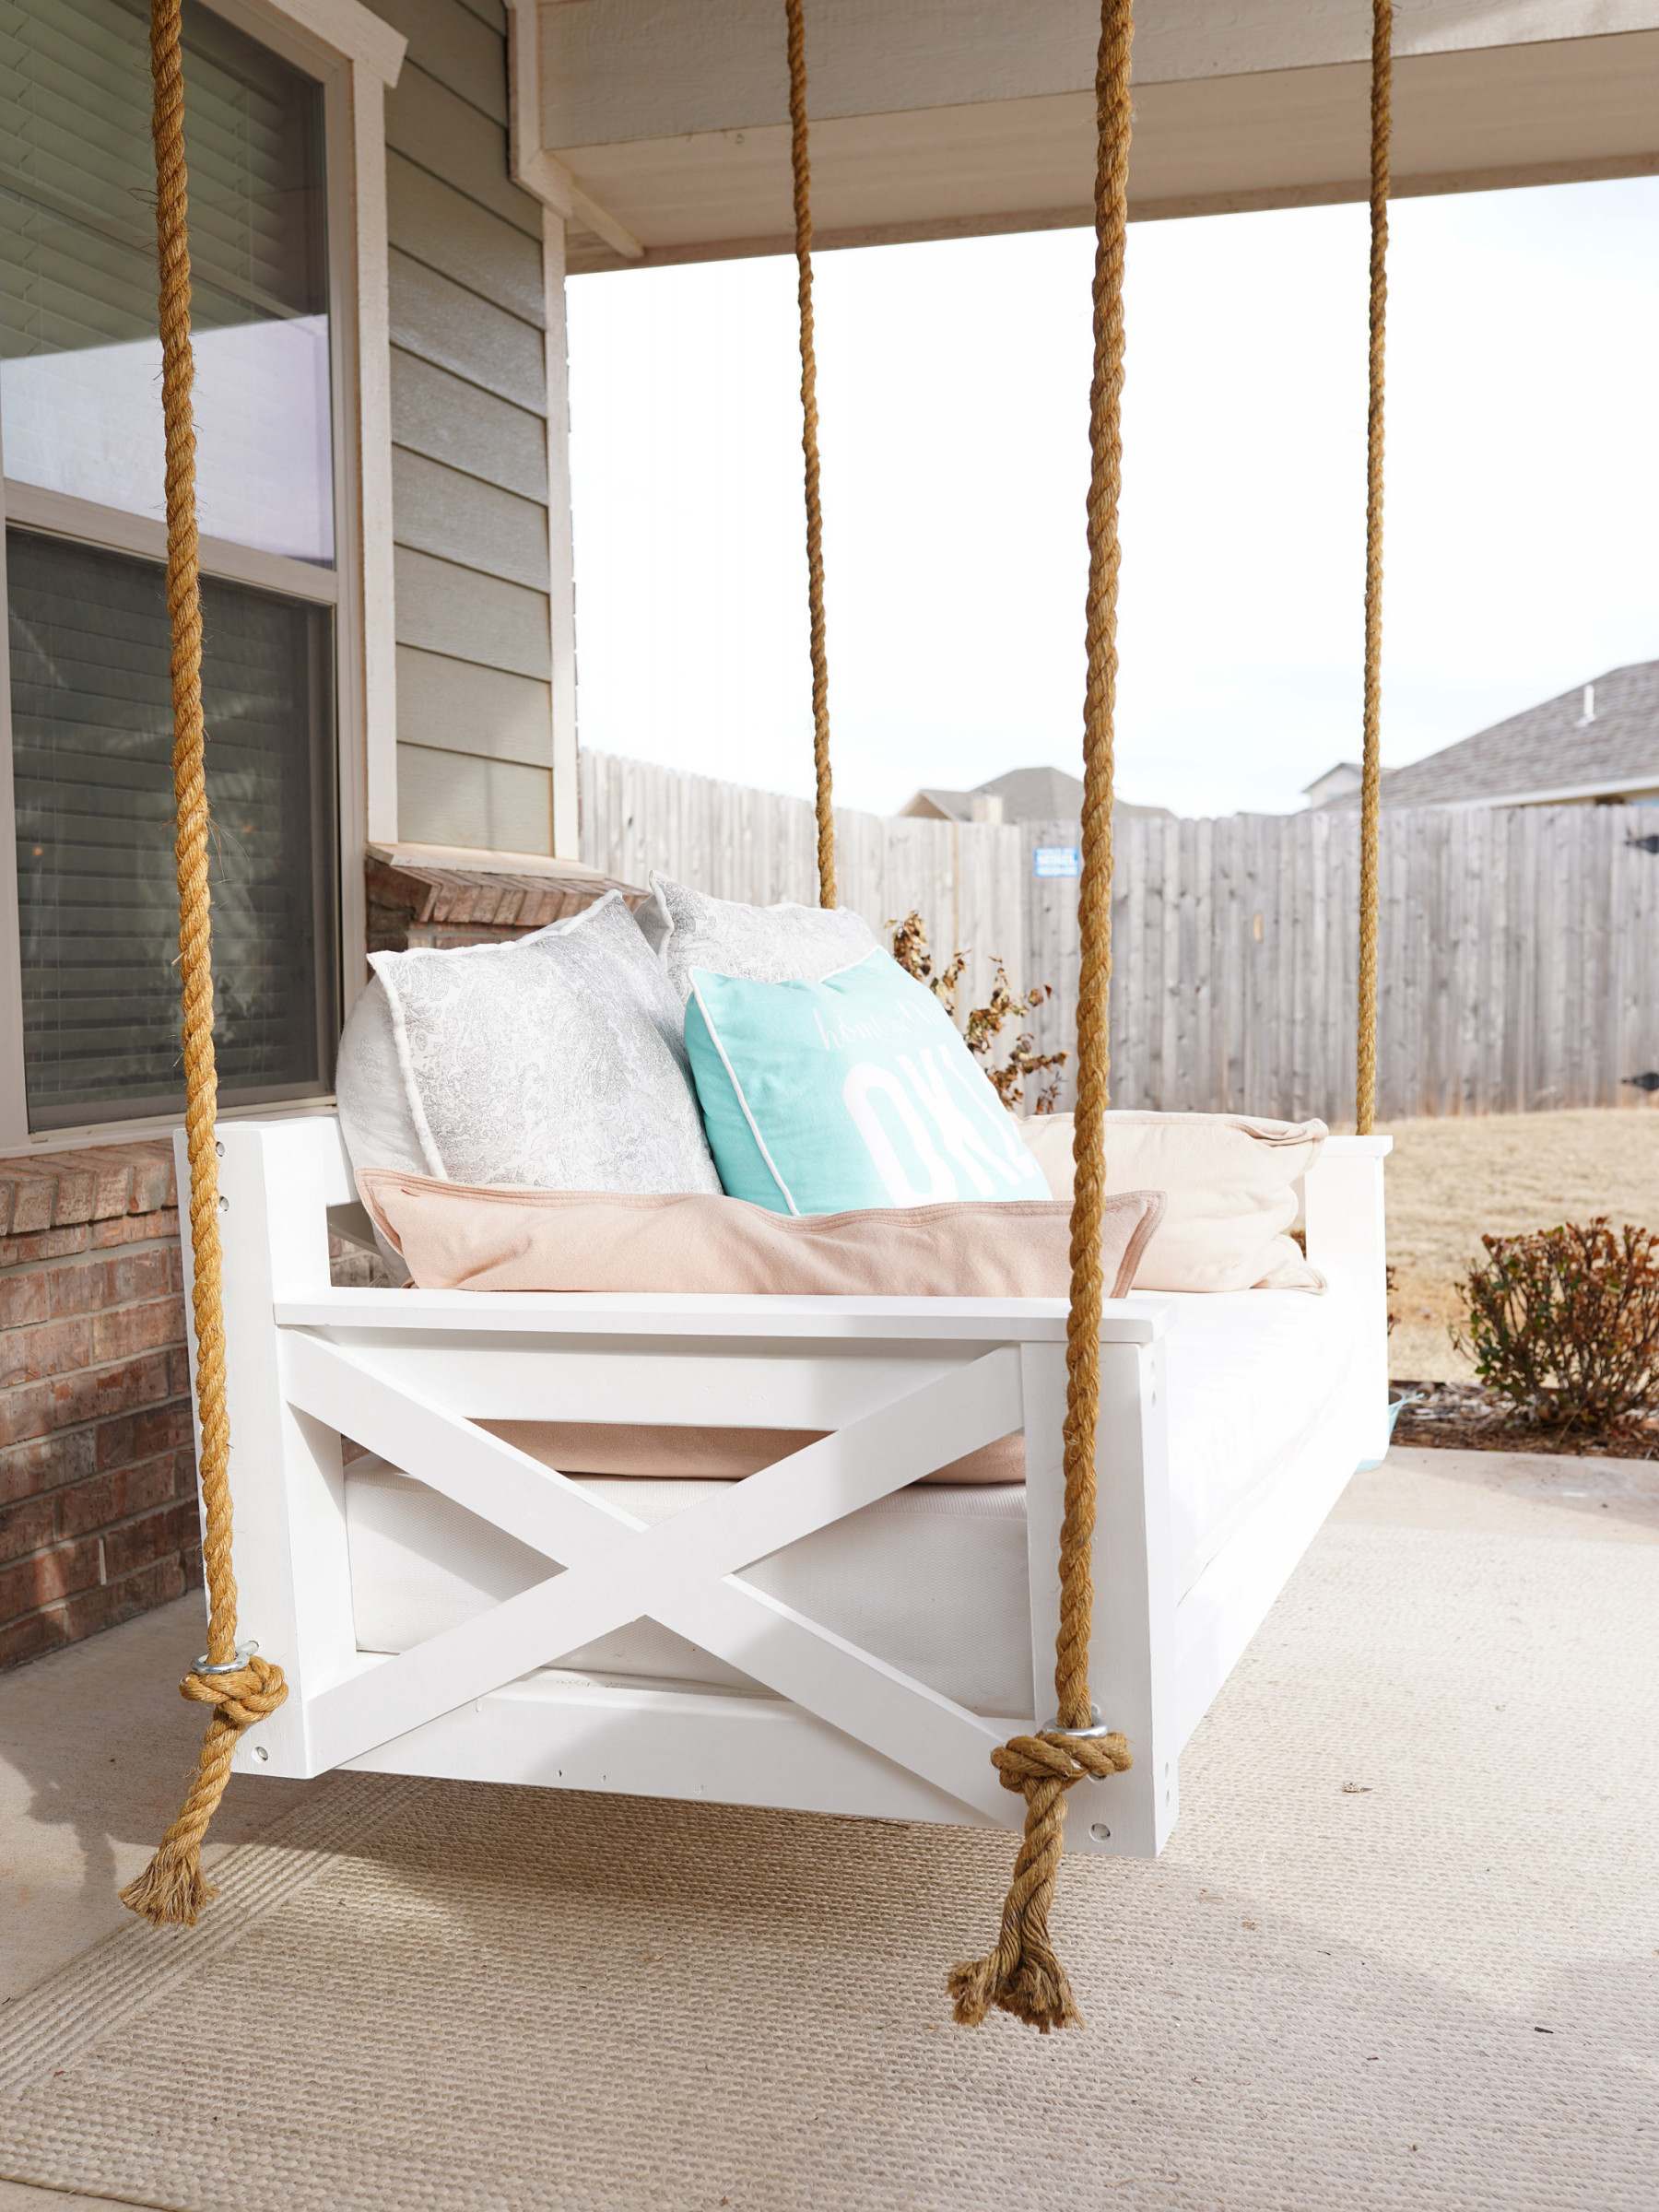 Porch Swing Beds